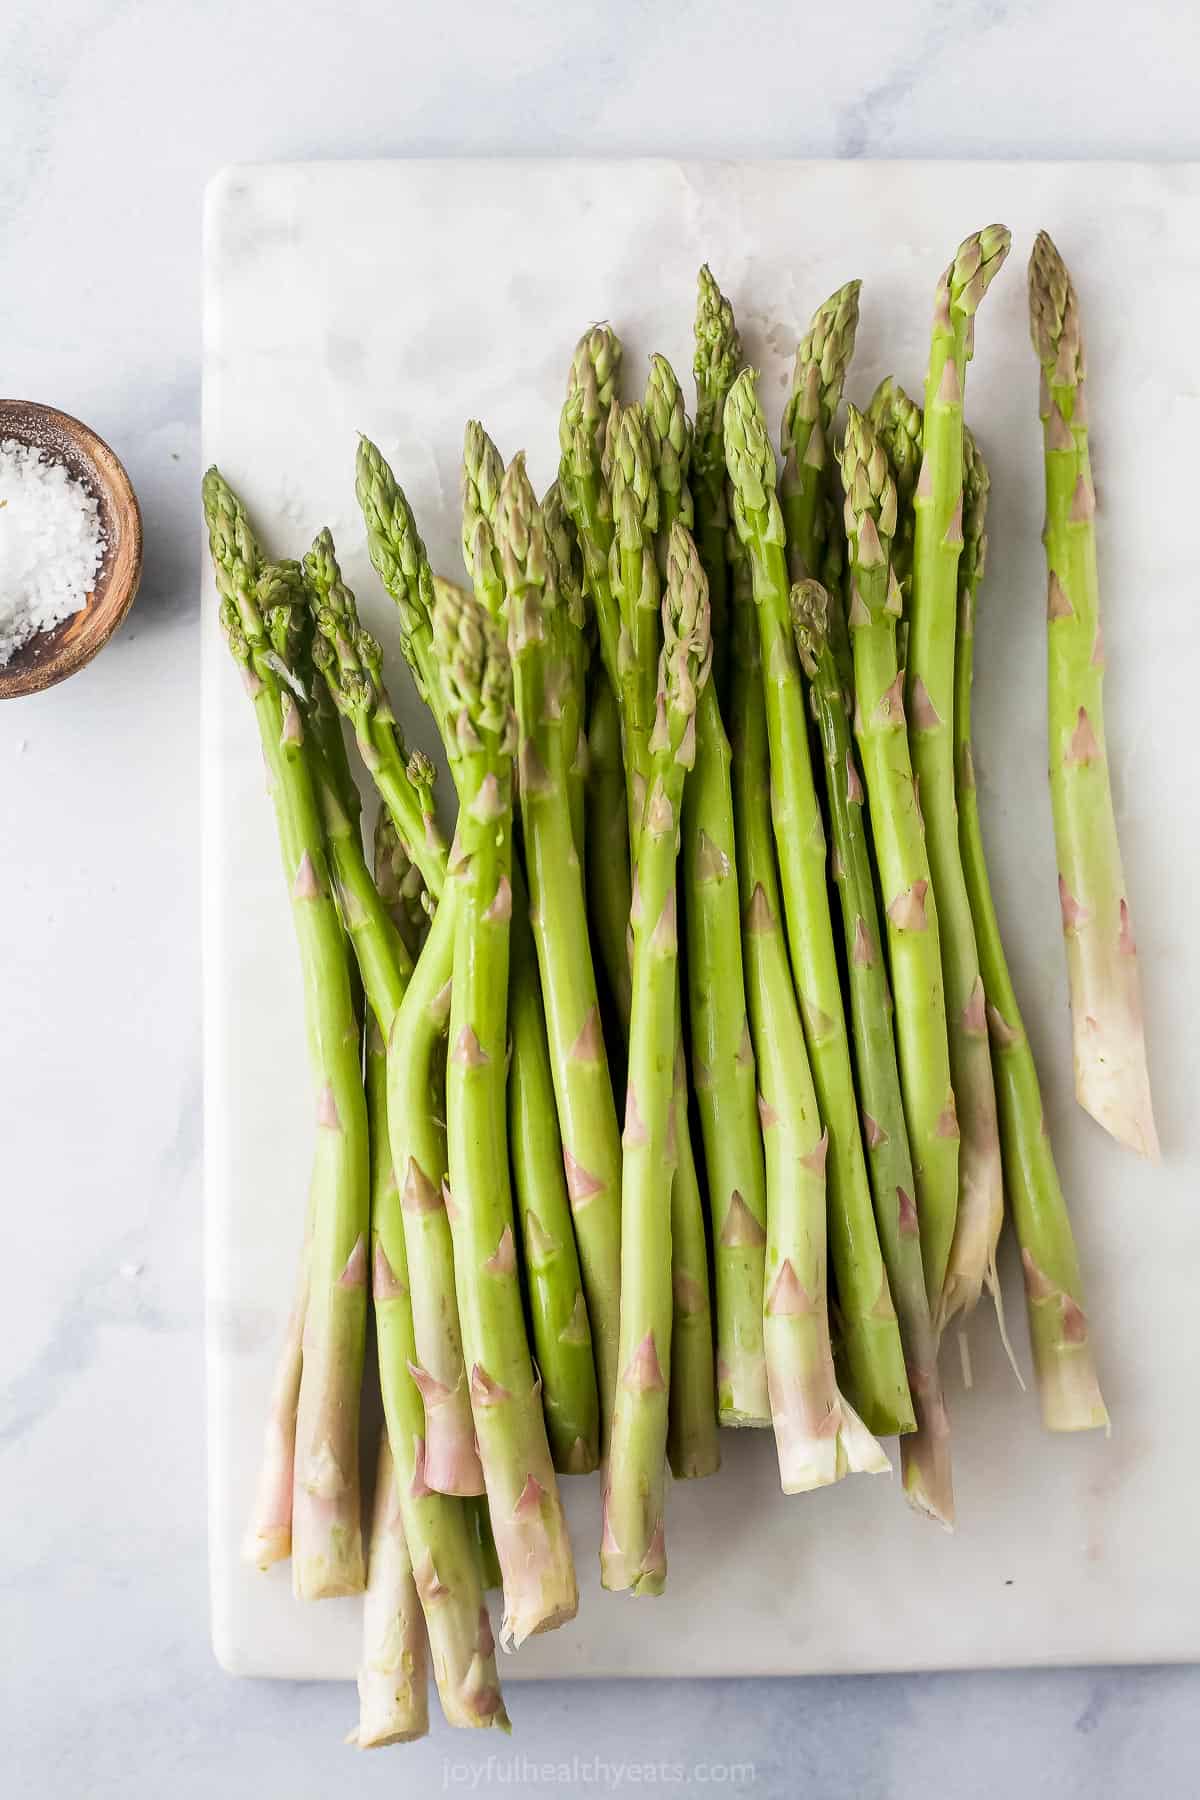 Untrimmed stalks of asparagus piled onto a cutting board with a dish of salt beside it